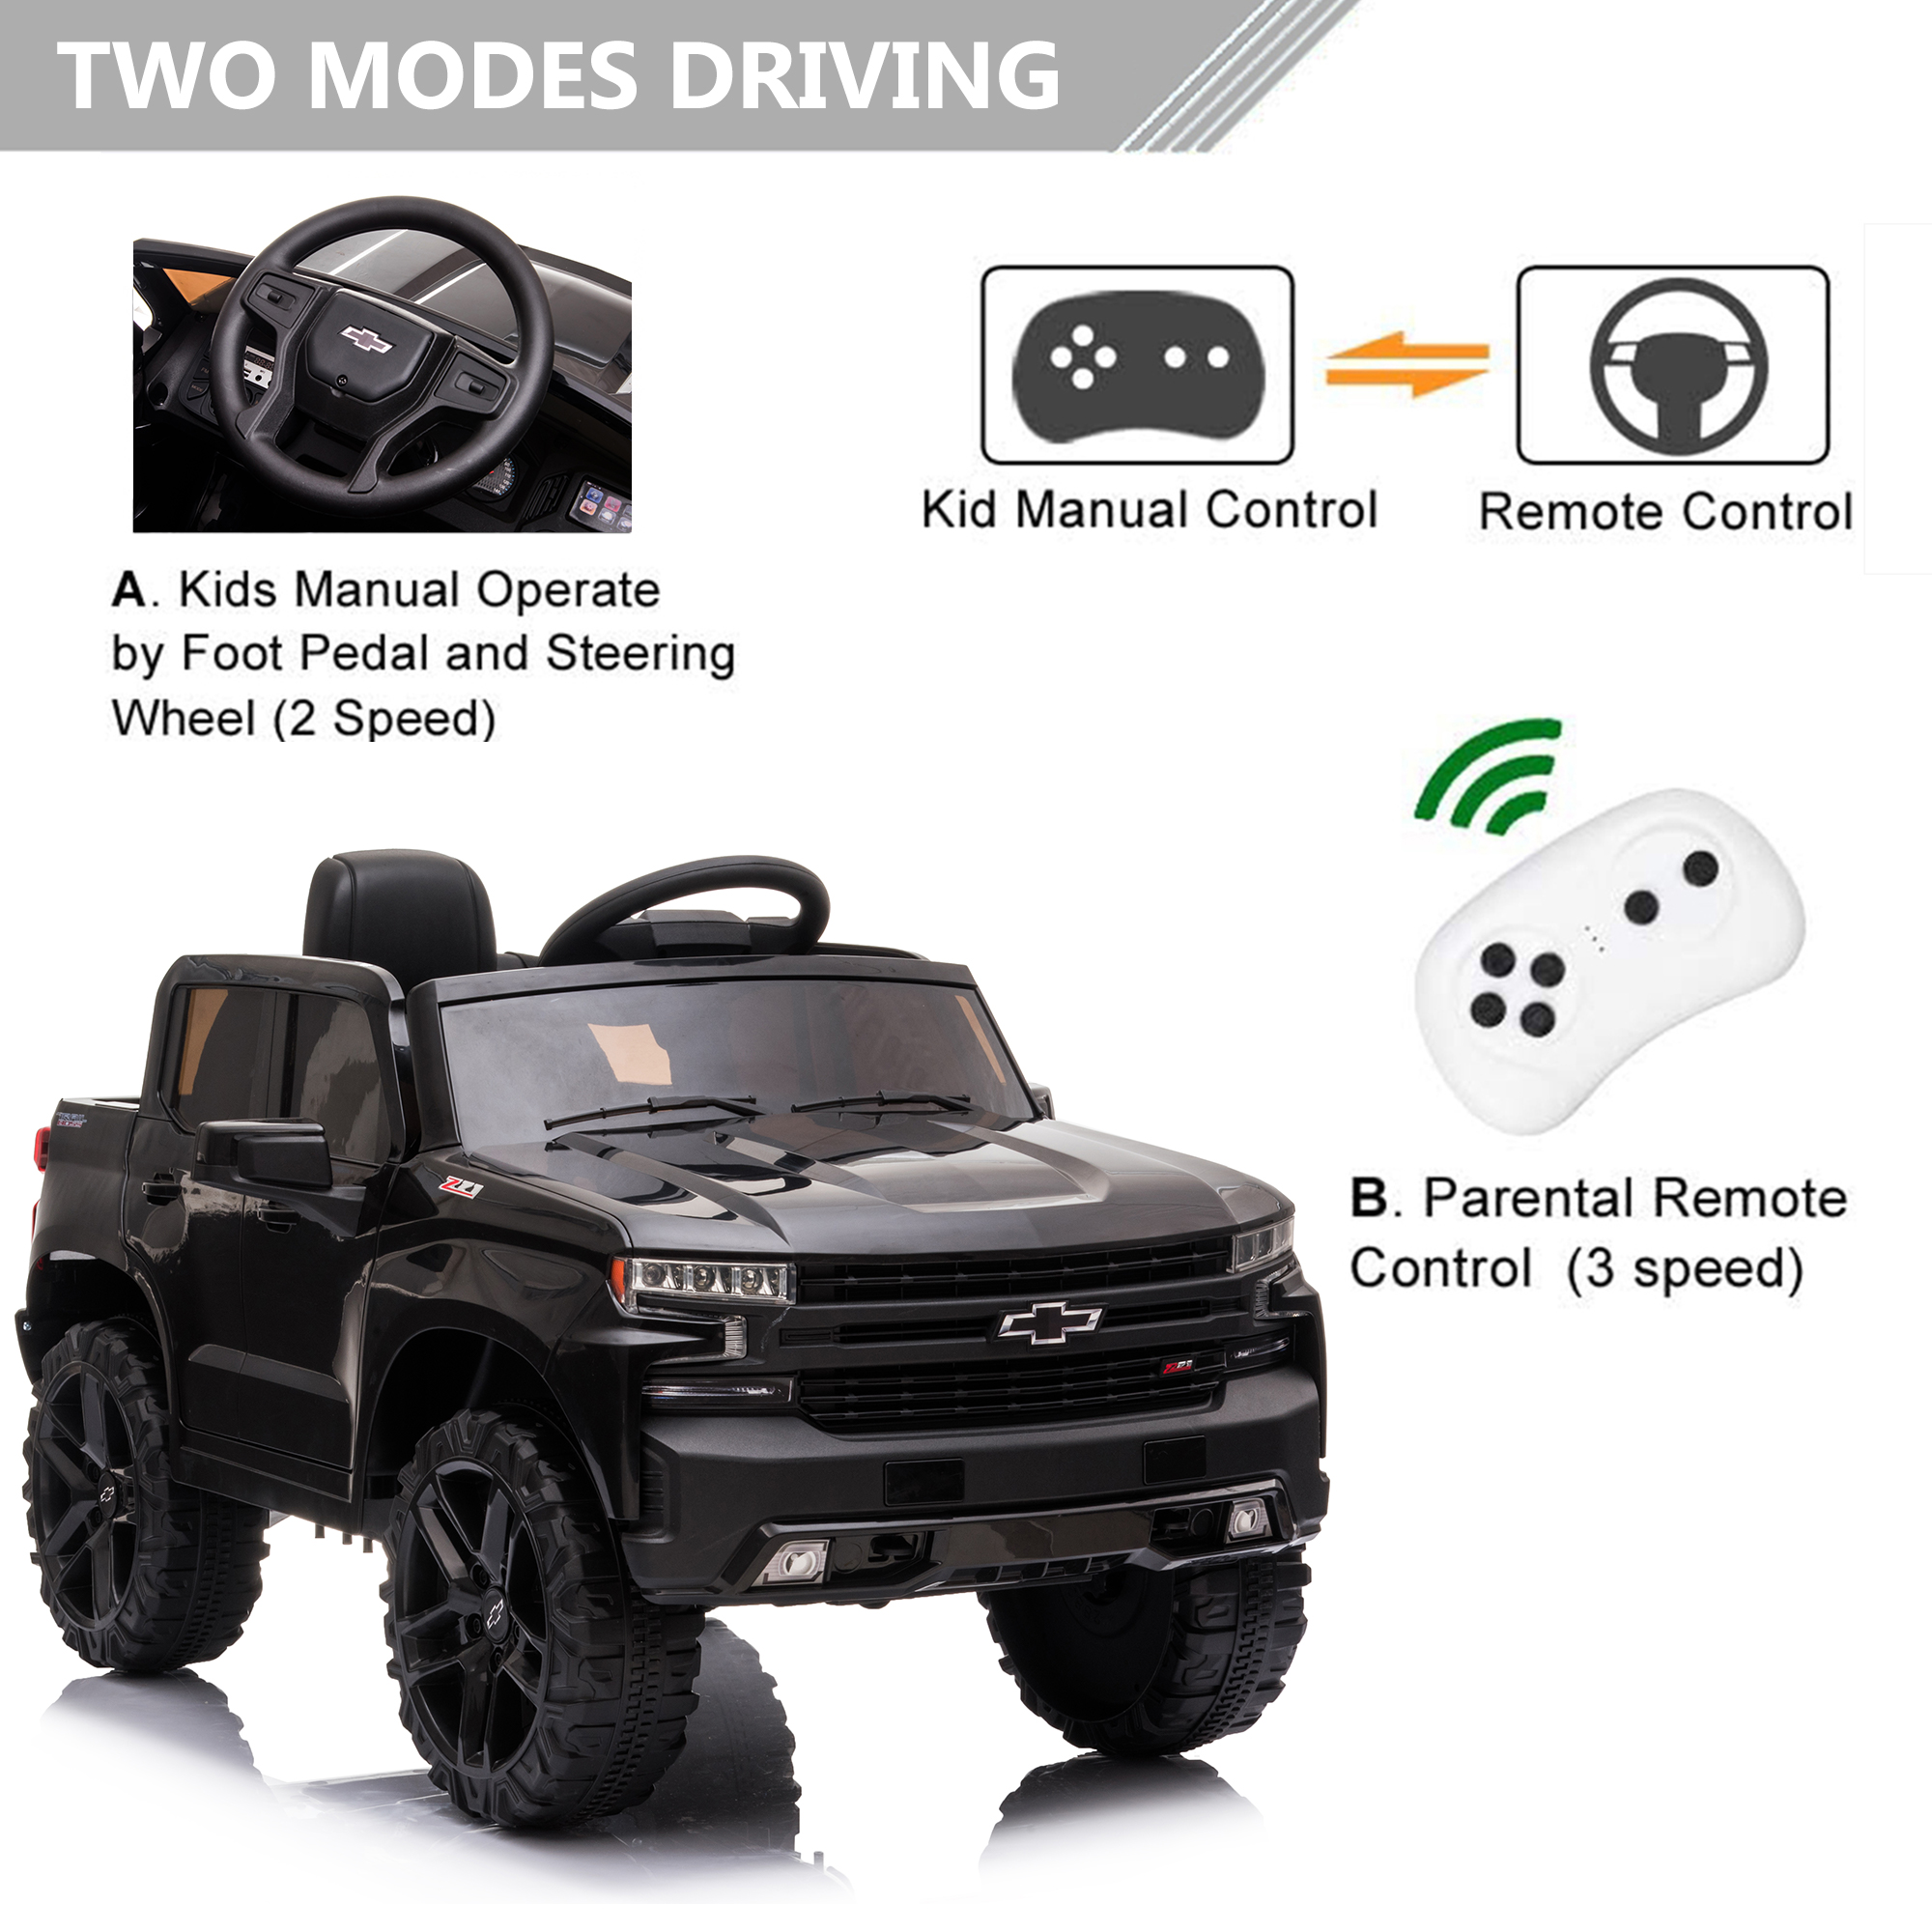 Official Licensed Chevrolet Ride On Car, 12V Ride-On Truck Toy for Kids, Electric 4 Wheels Kids Toy w/Parent Remote Control, Foot Pedal, MP3 Player, 2 Speeds, Ages 3-5 Years - image 2 of 9